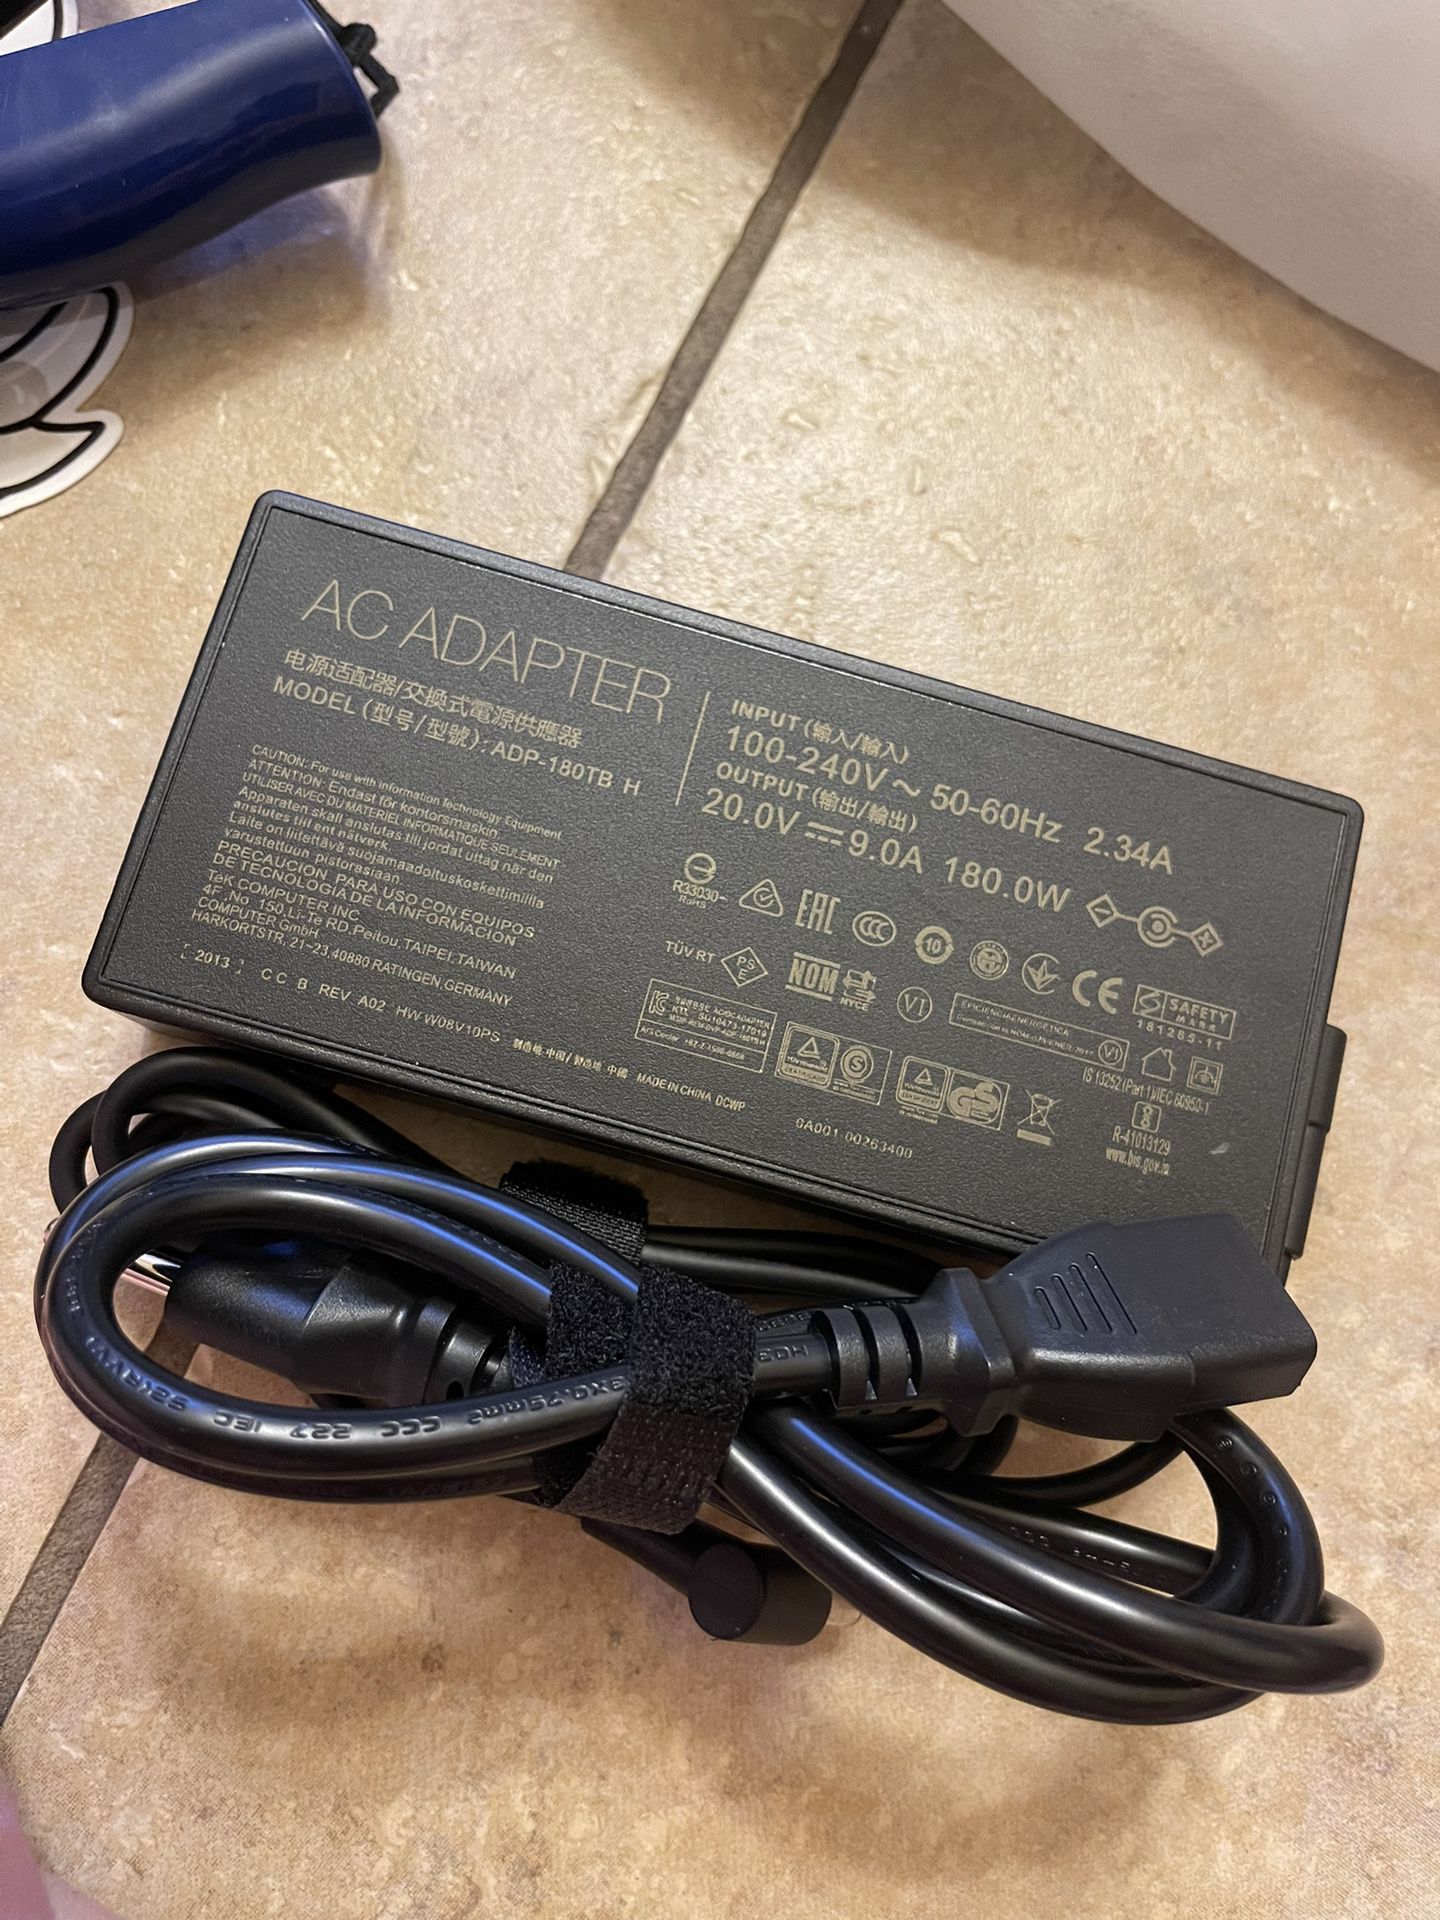 240W Zephyrus Charger ADP-240EB B Fit for ASUS ROG Zephyrus G14 G15 G16 M16, ROG Strix Scar G15 G17 15 17, ROG Flow X16 GV601 Gaming Laptop AC Adapter